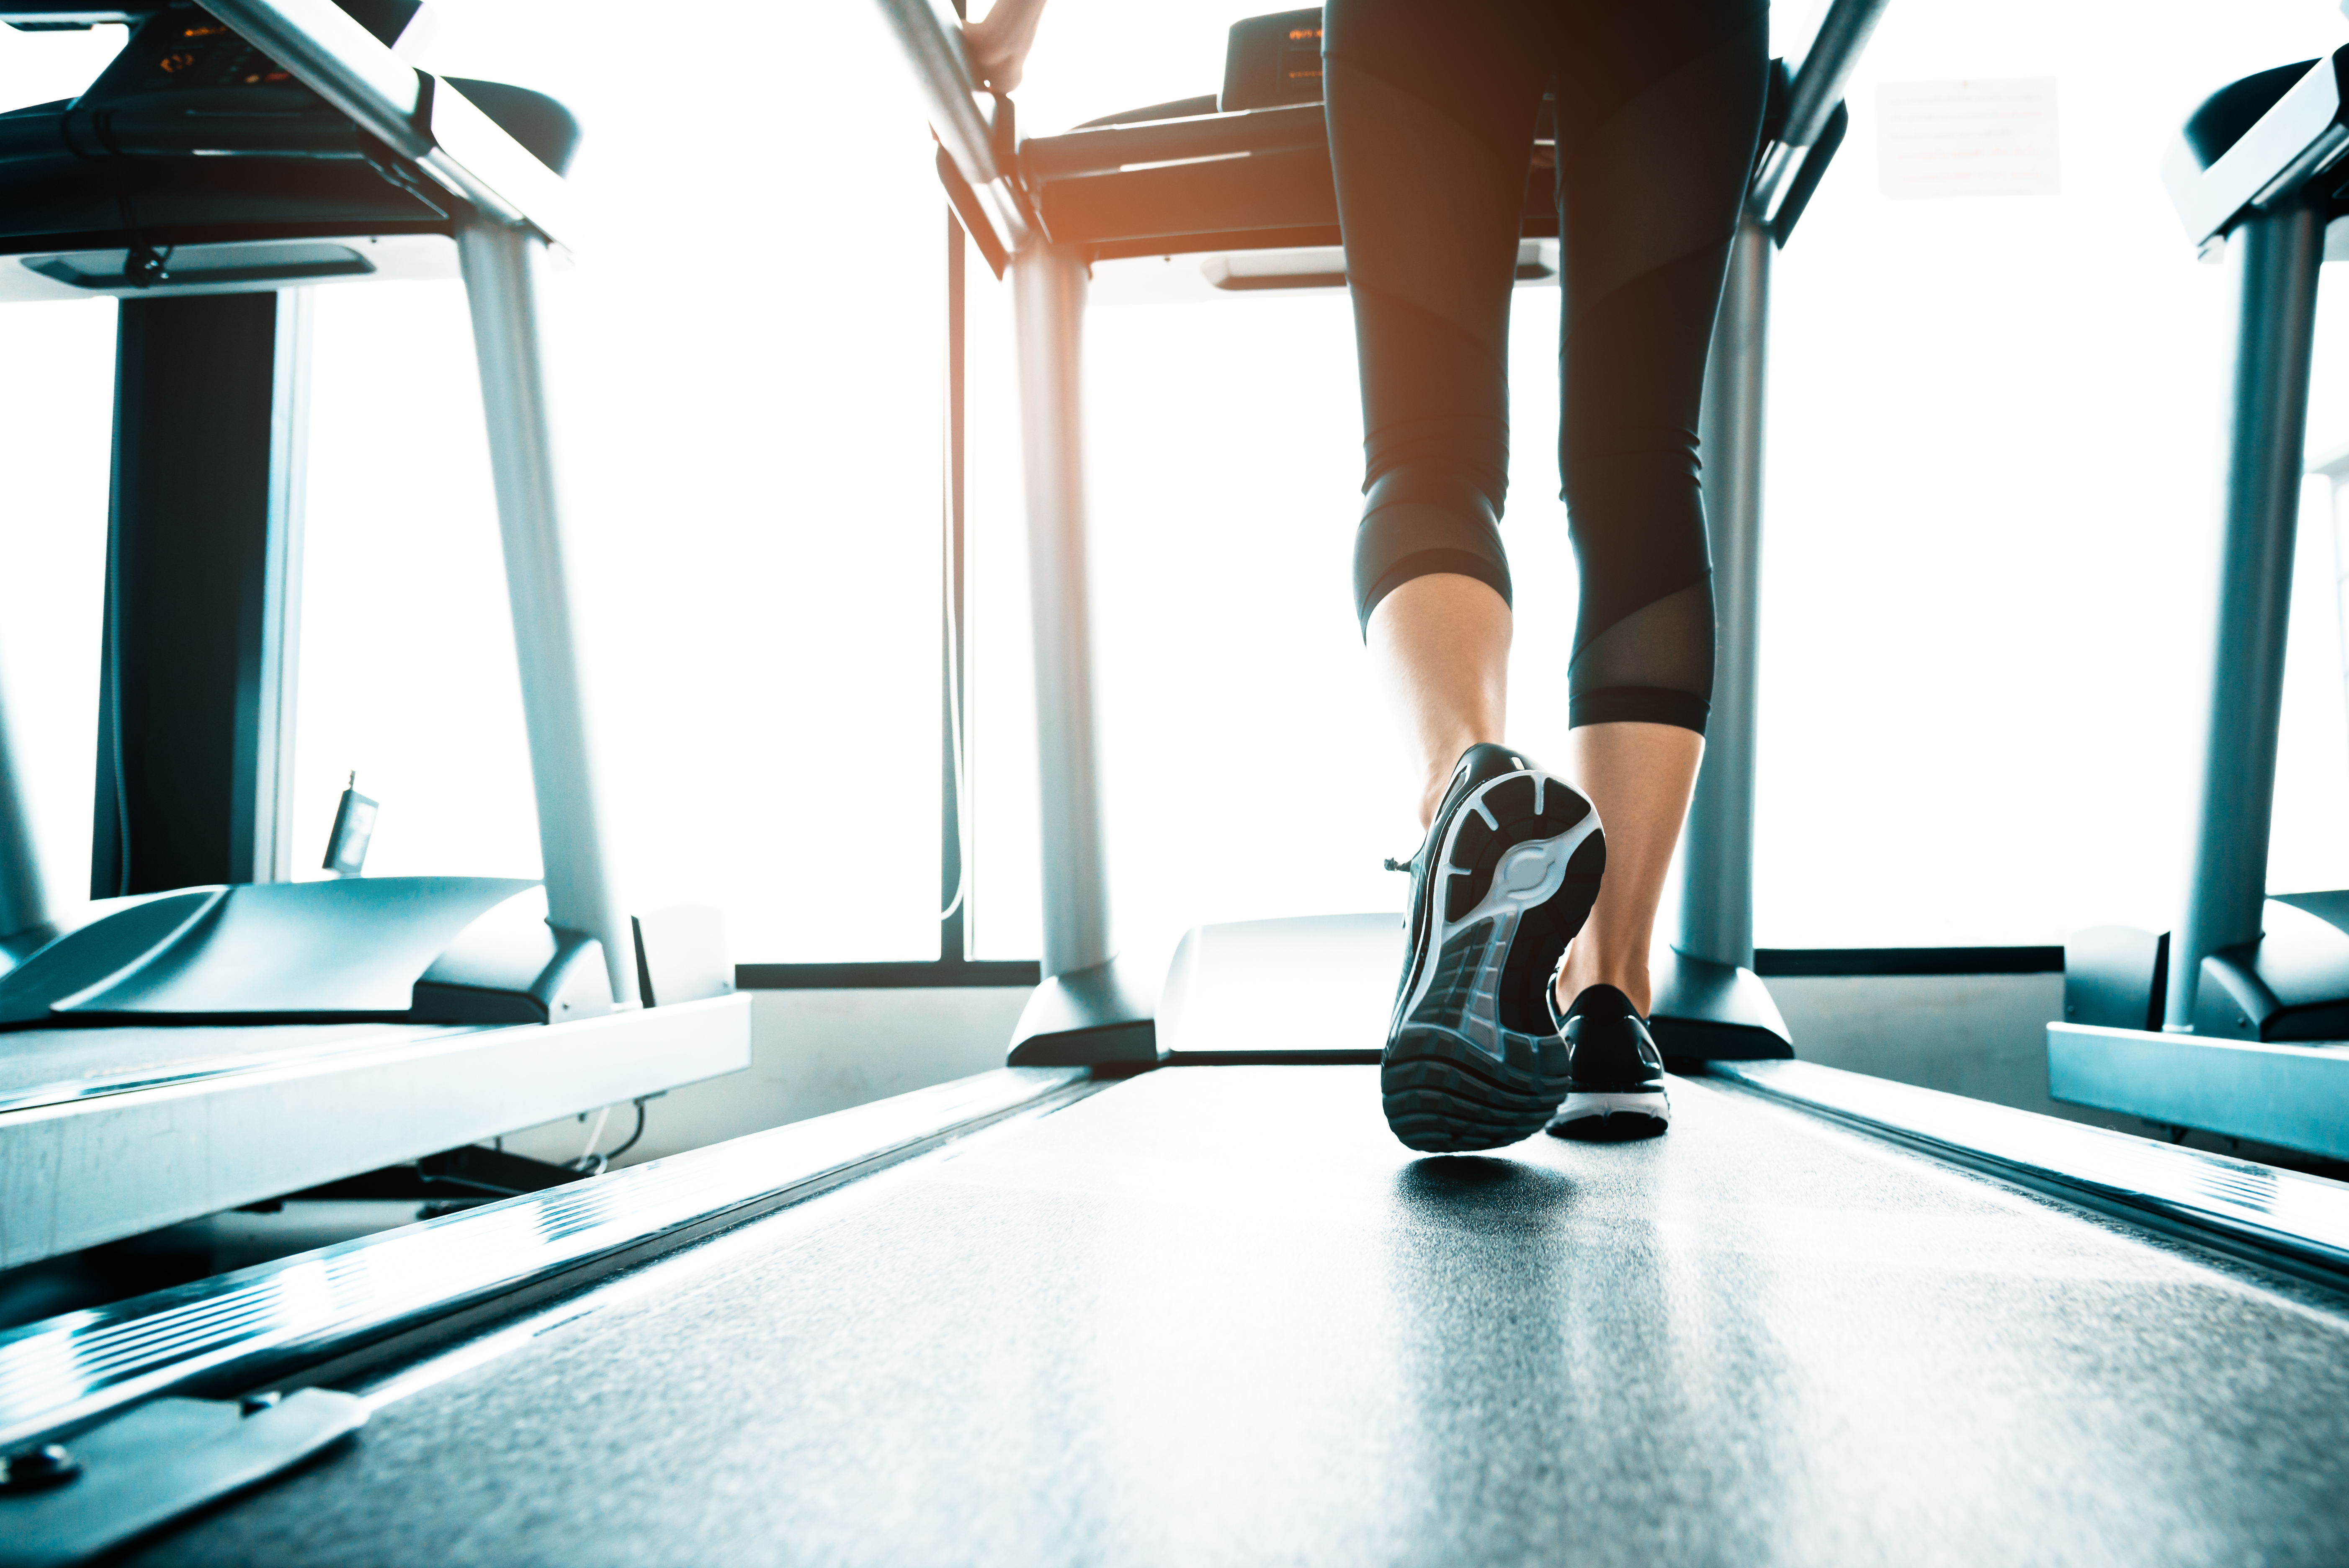 Close up of people who exercising on treadmill. Close-up of woman legs walking by treadmill in sports club. Fitness and body build up concept. Workout and strength training concept. Sport club theme.